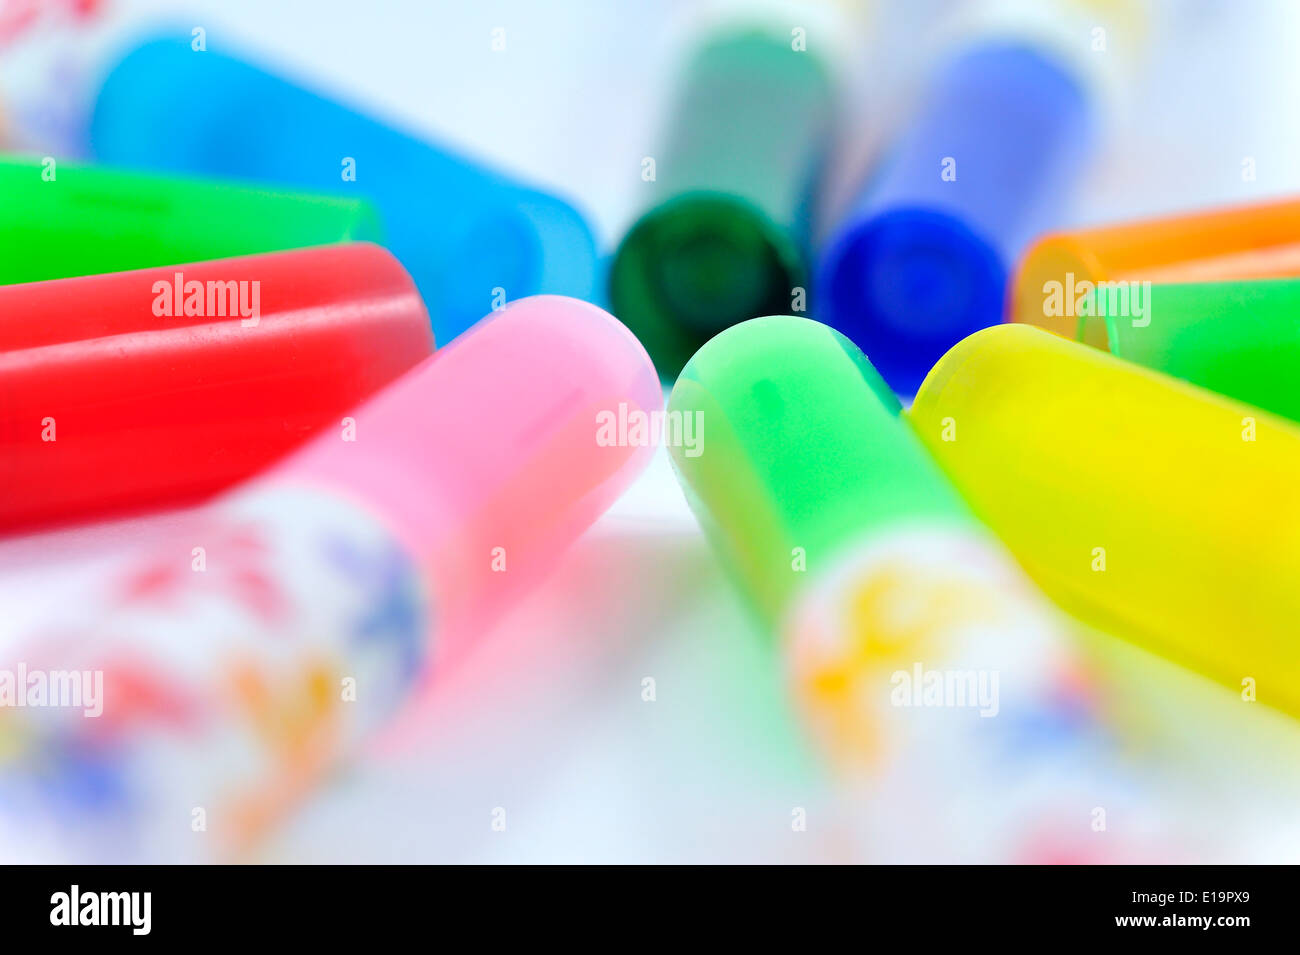 Felt tipped coloring pens close up Stock Photo